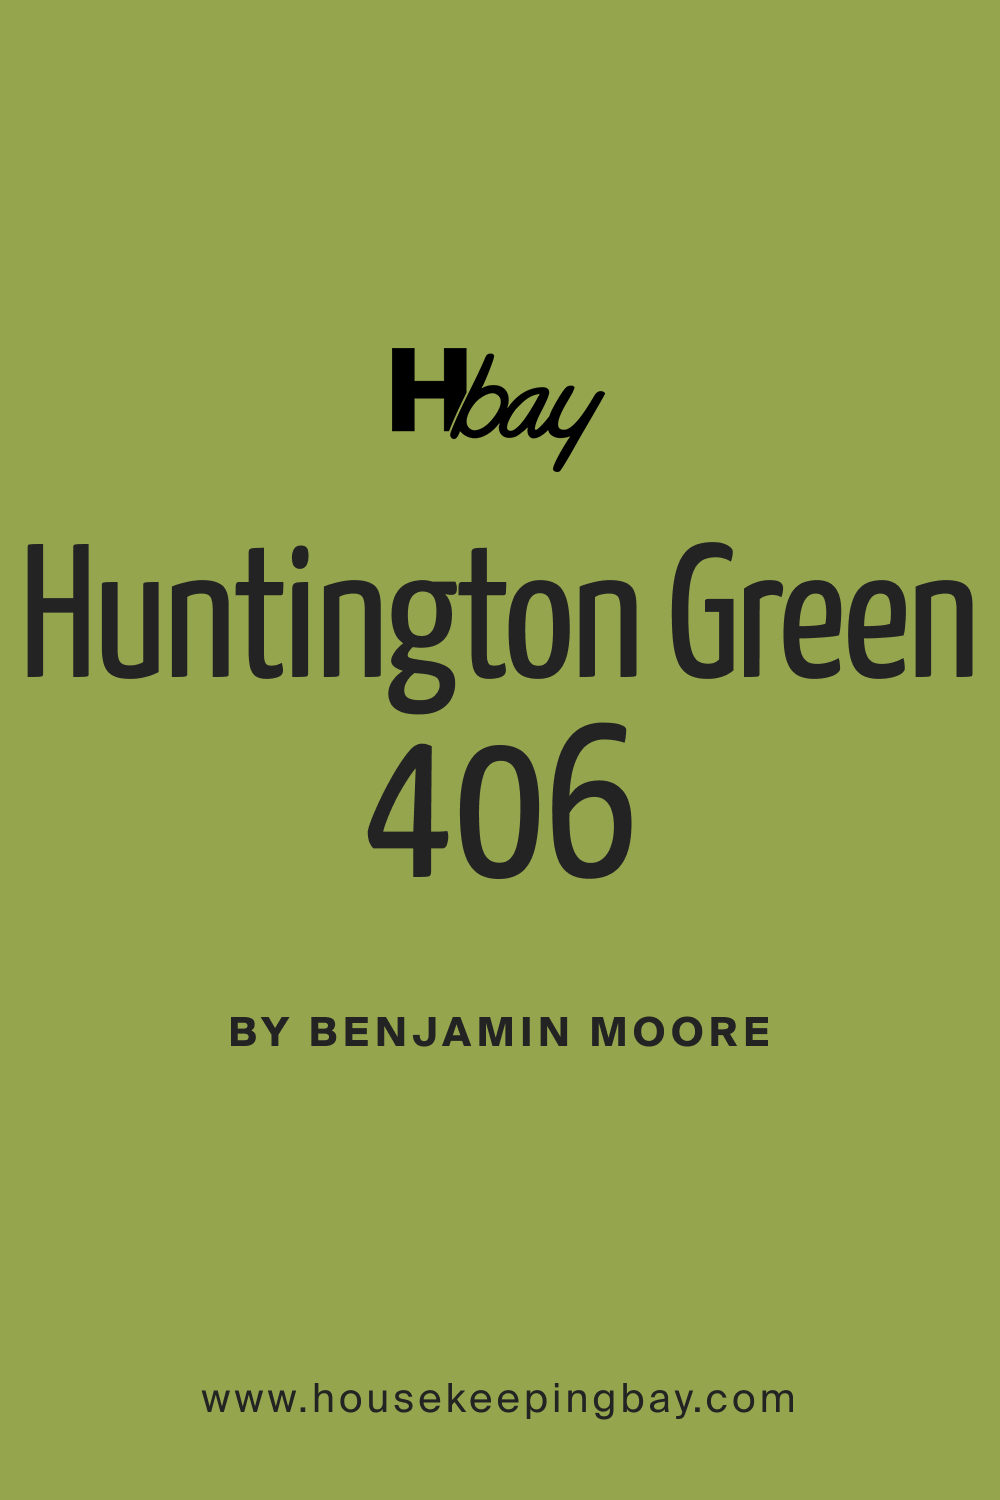 What Color Is Huntington Green 406?